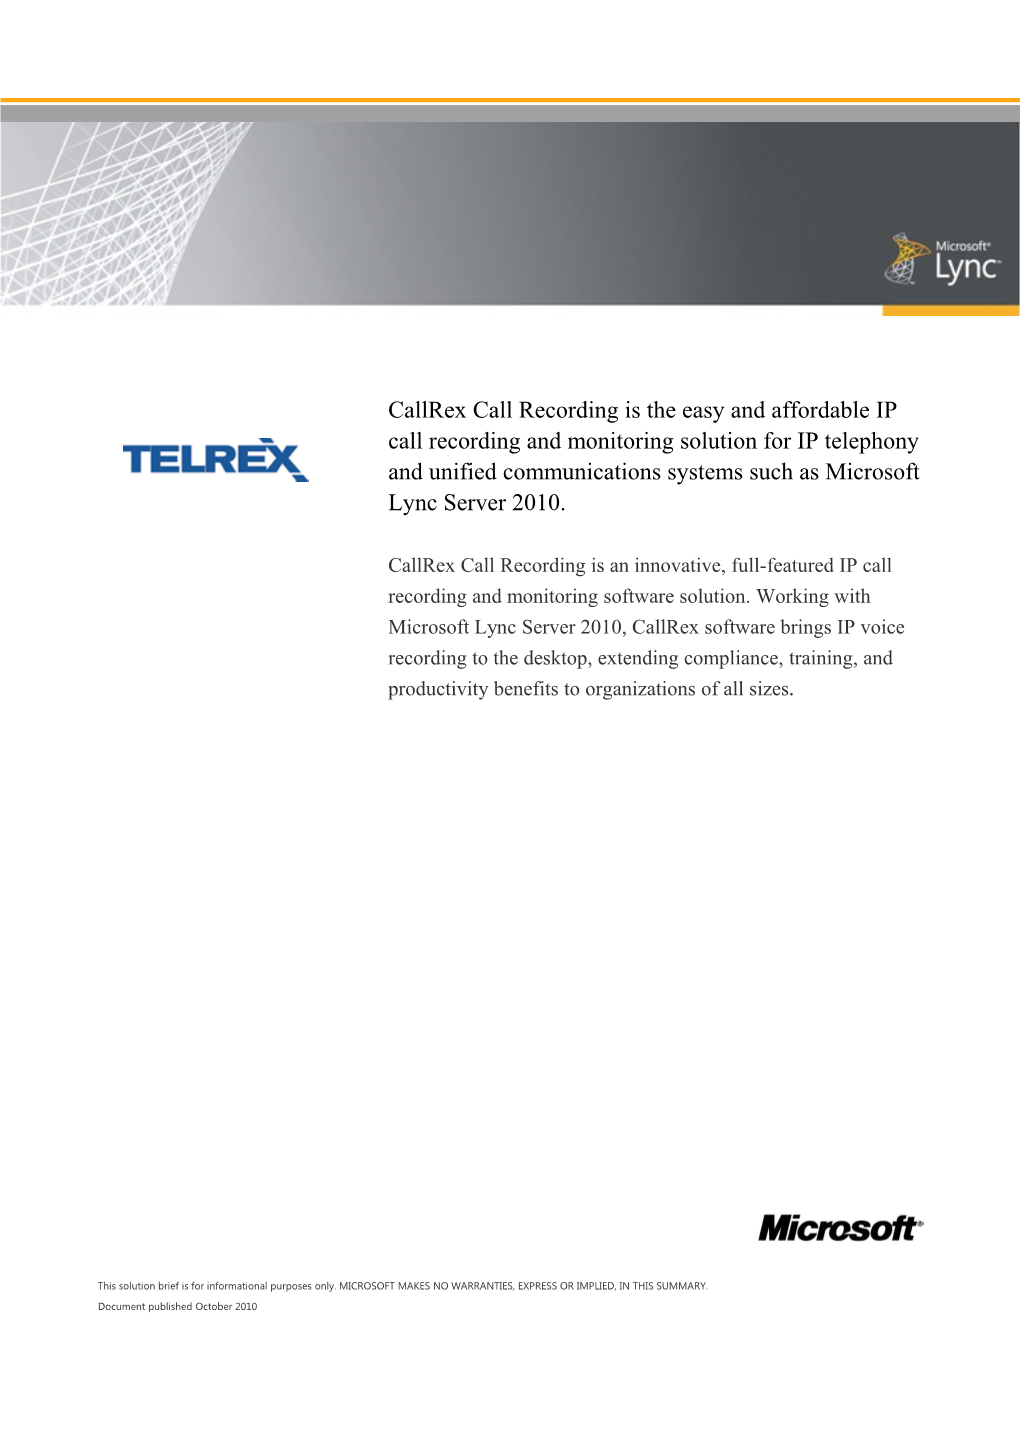 Callrex Call Recording Is the Easy and Affordable IP Call Recording and Monitoring Solution